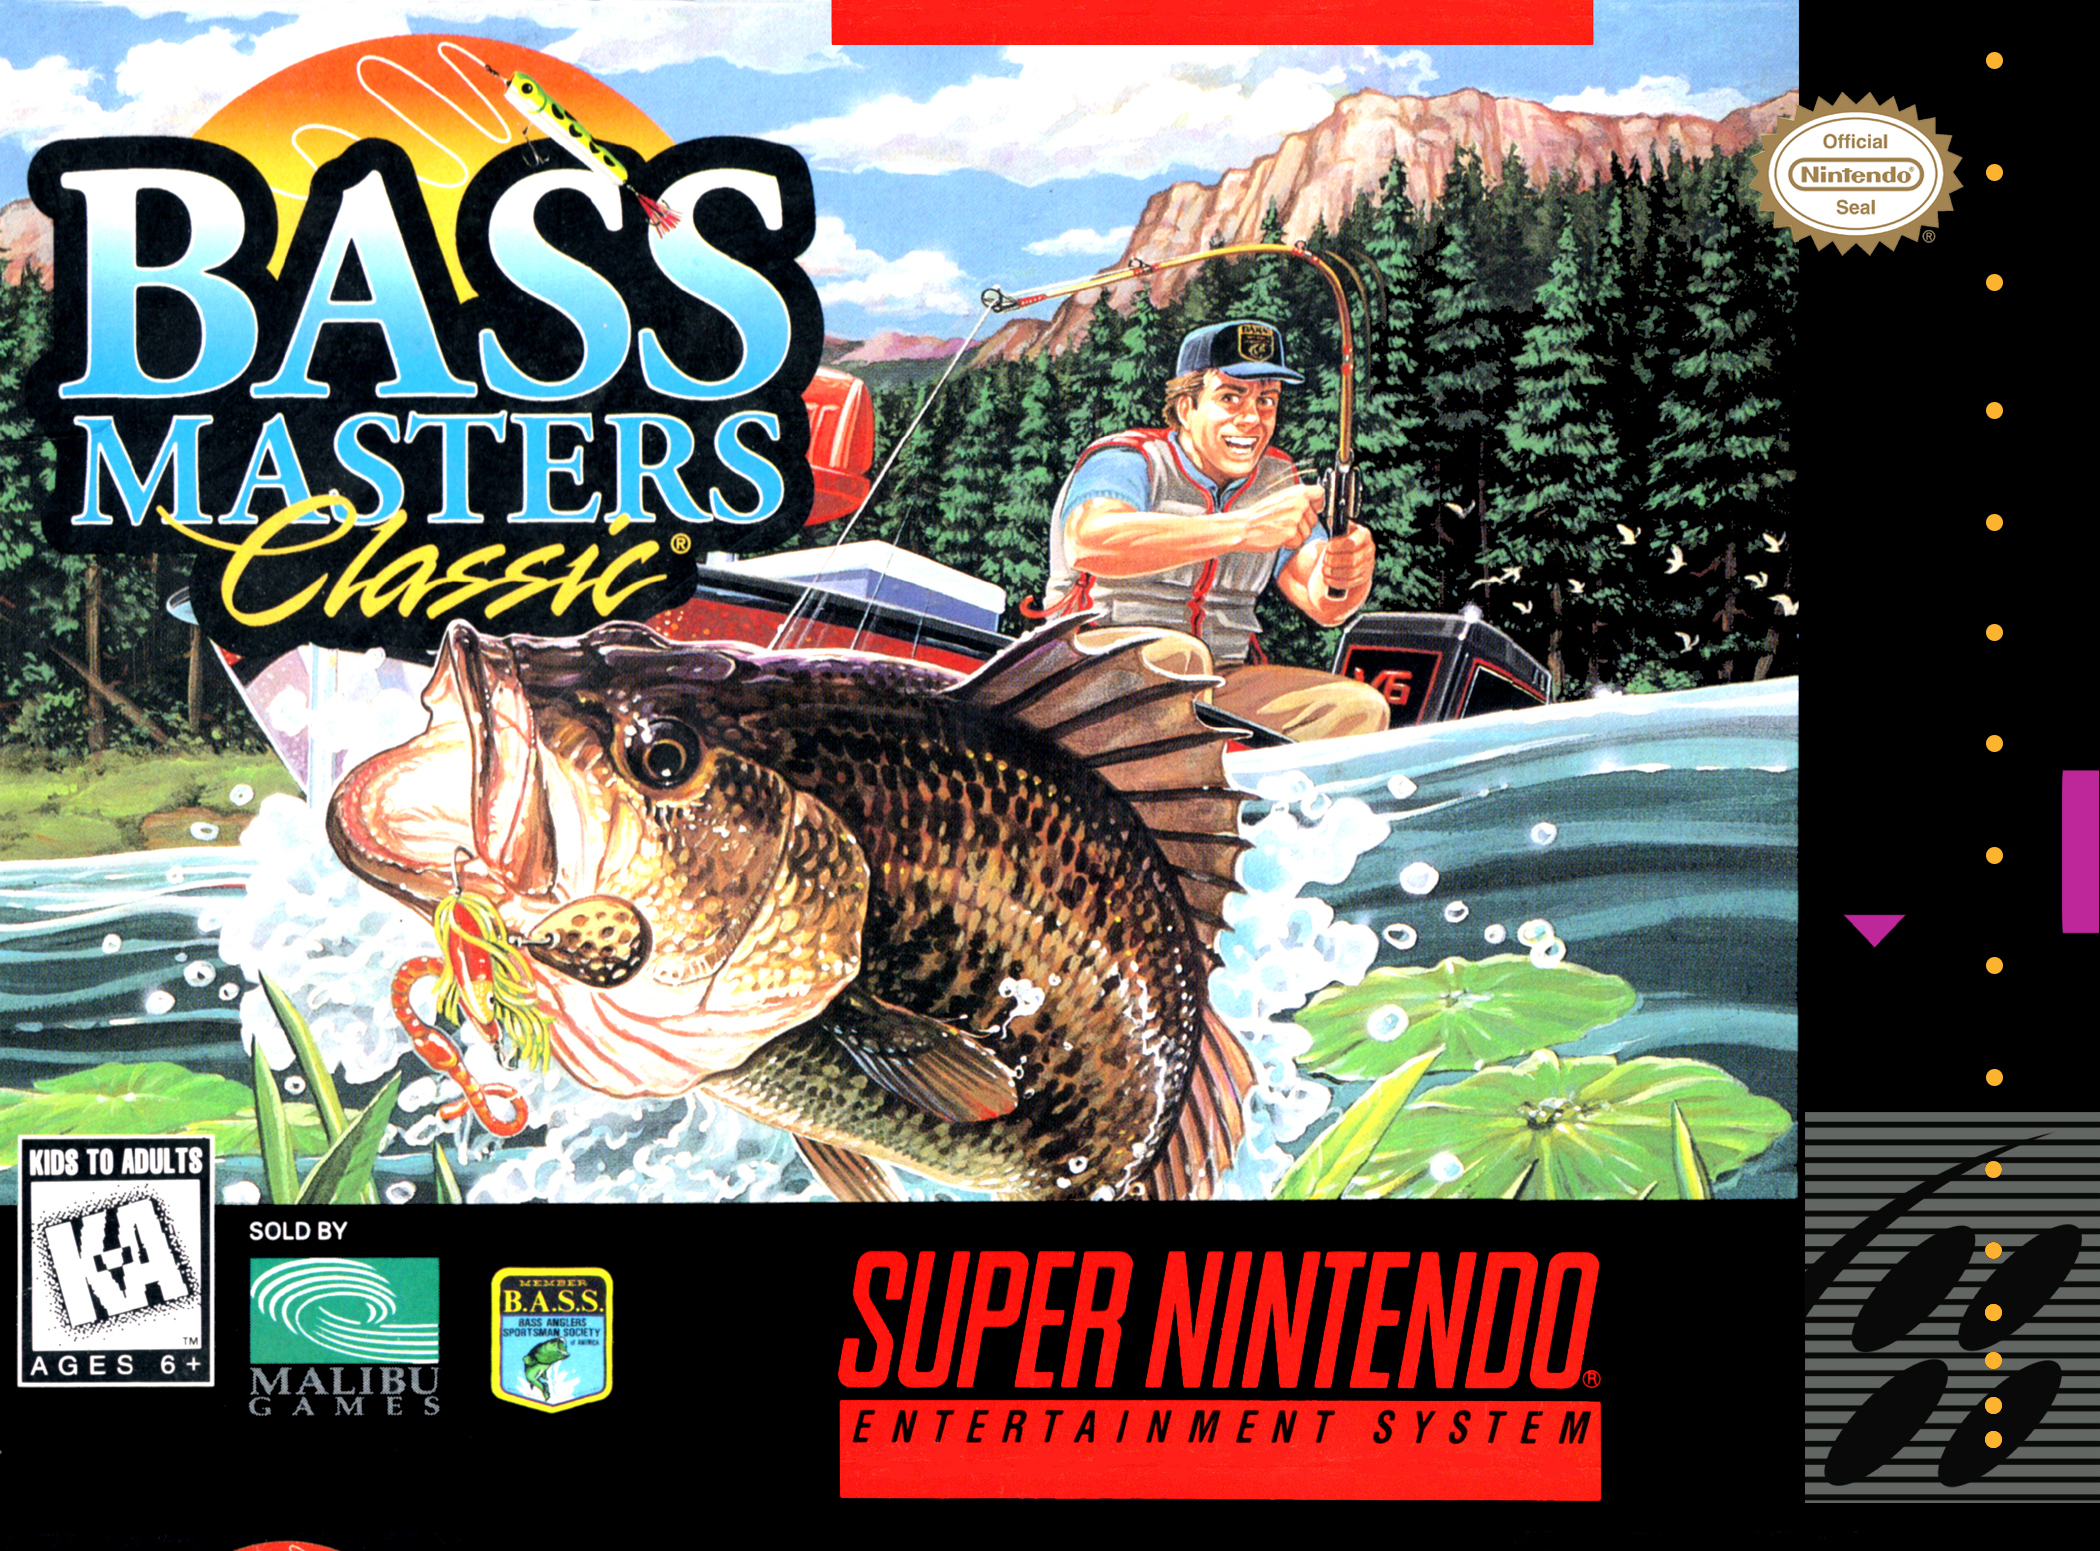 Bass Masters Classic GameLibrary